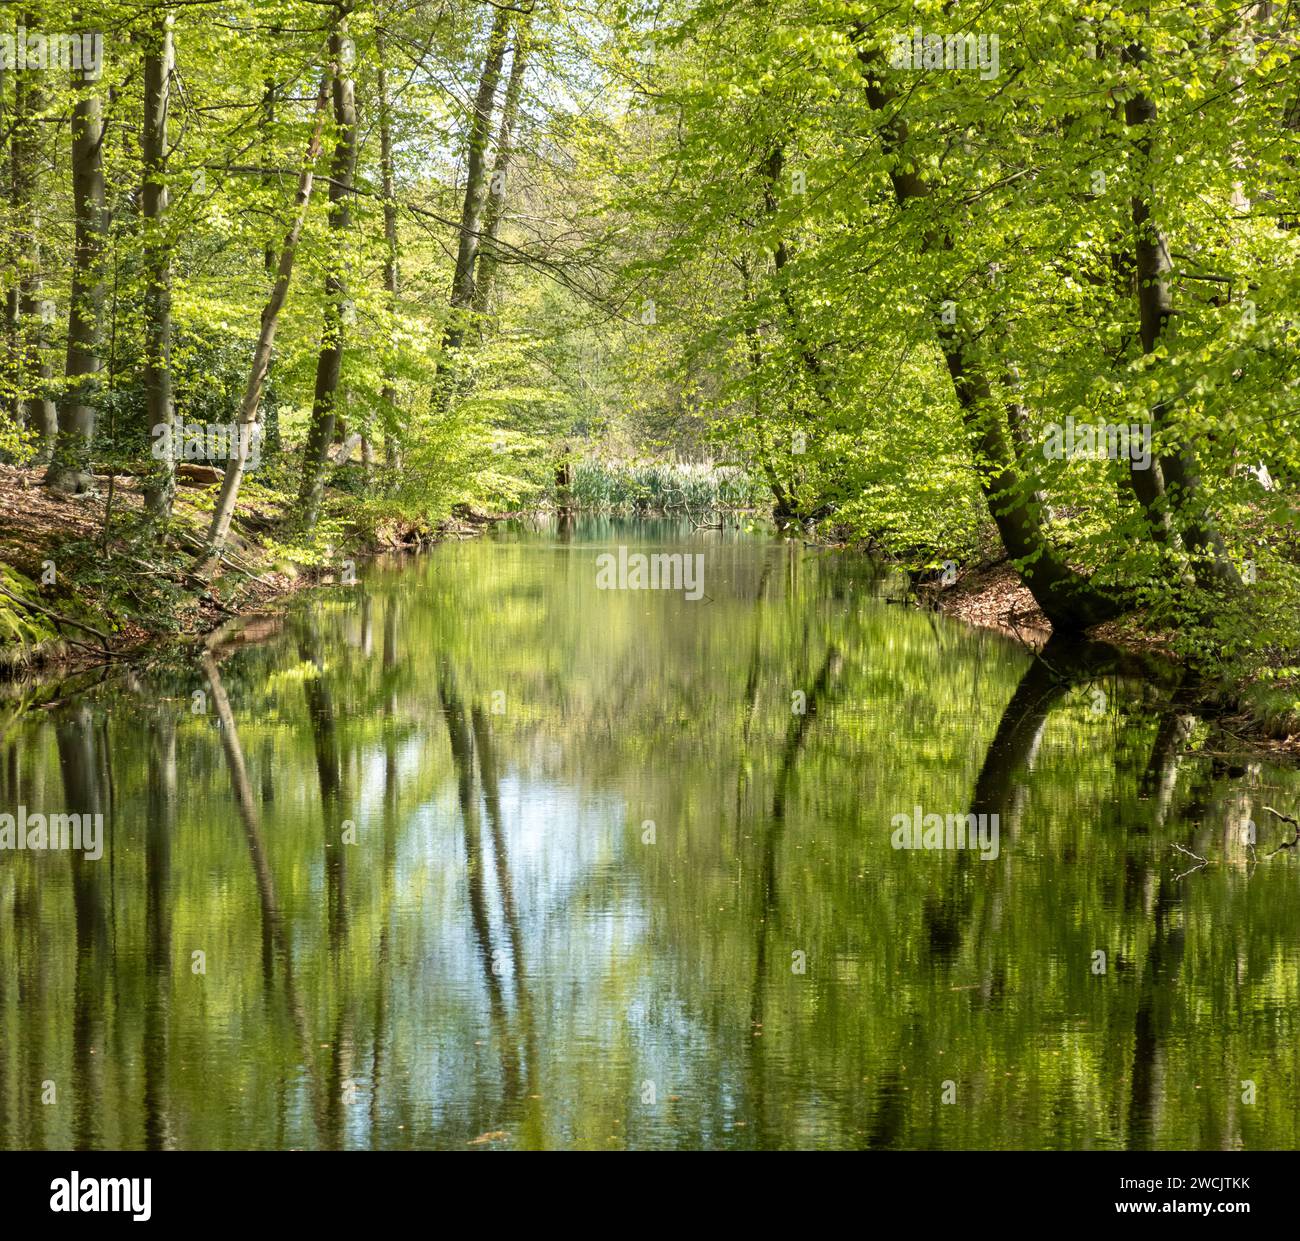 Reflection of trees in pond in woodland near Hilverbeek in Spanderswoud between Hilversum and 's Graveland, Netherlands Stock Photo